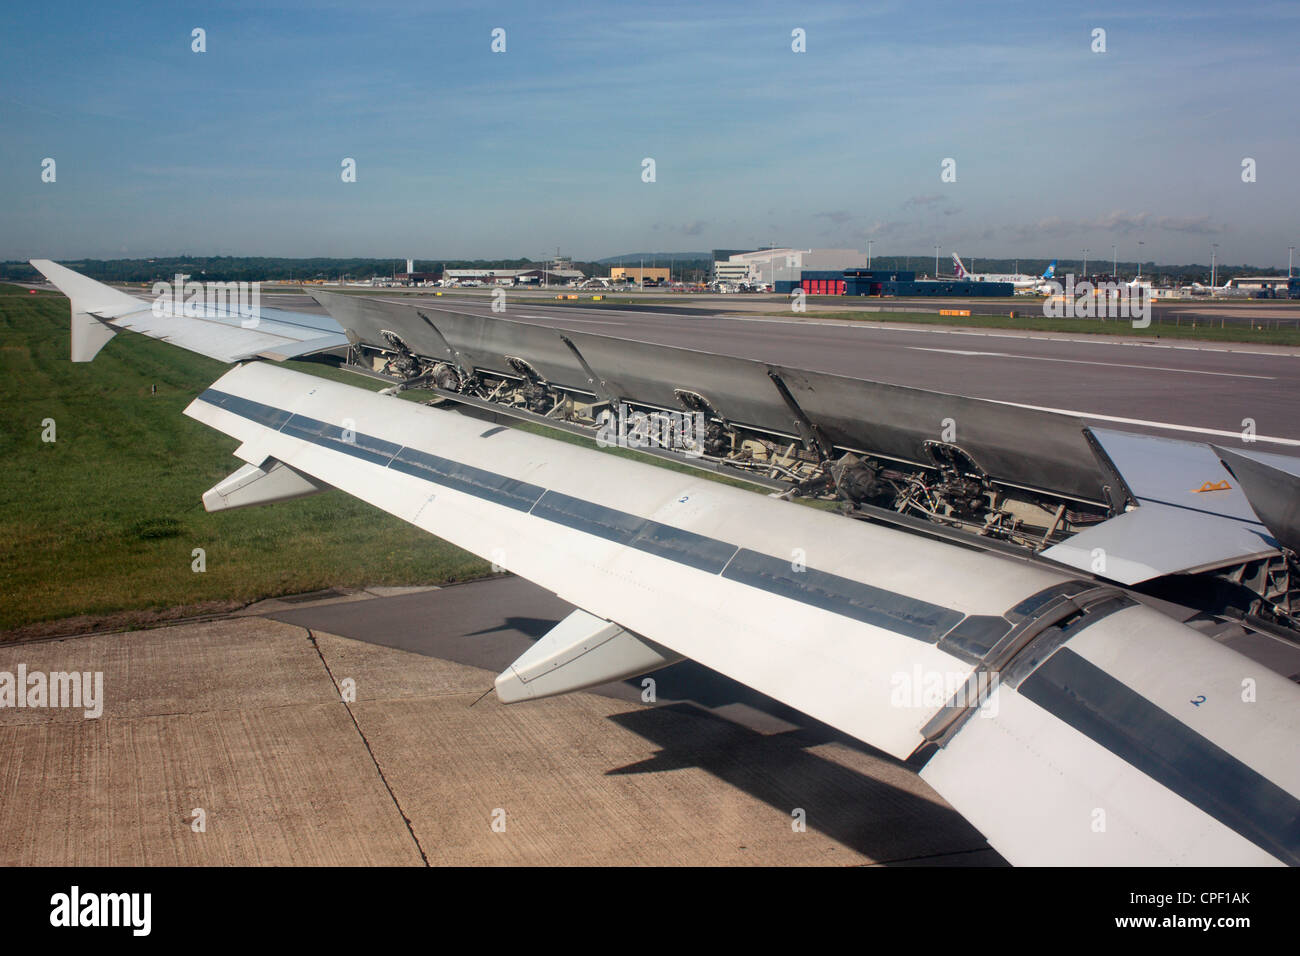 Wing of an Airbus A320 jet plane after landing with spoilers up and flaps down for high drag. Aerodynamics and aircraft design Stock Photo